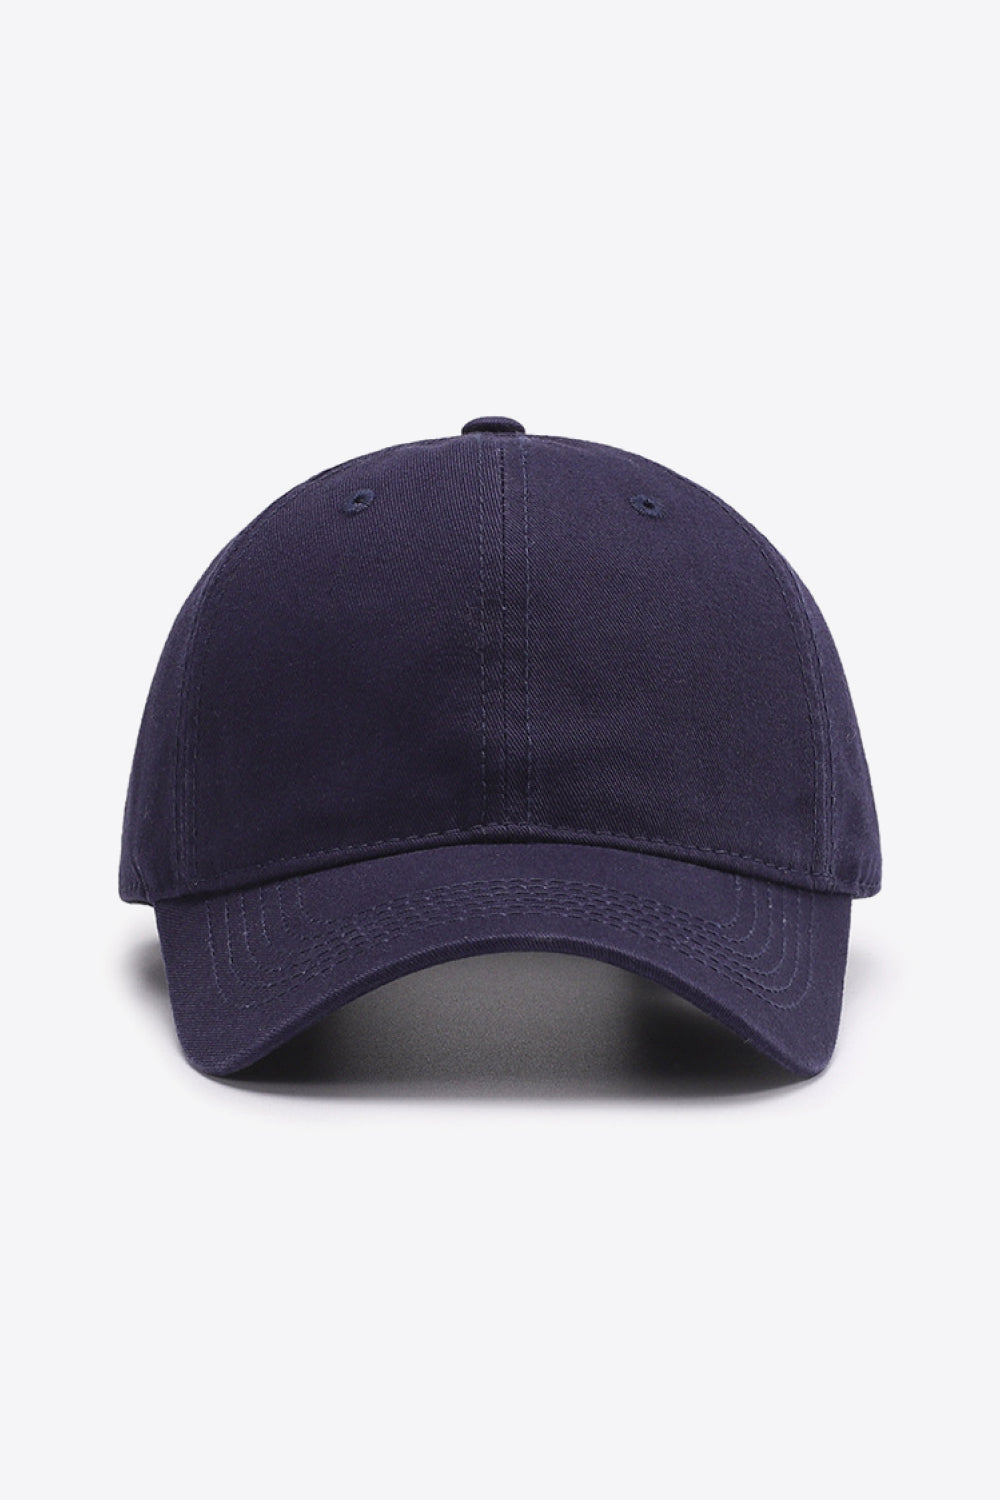 Cool and Classic Baseball Cap Navy One Size